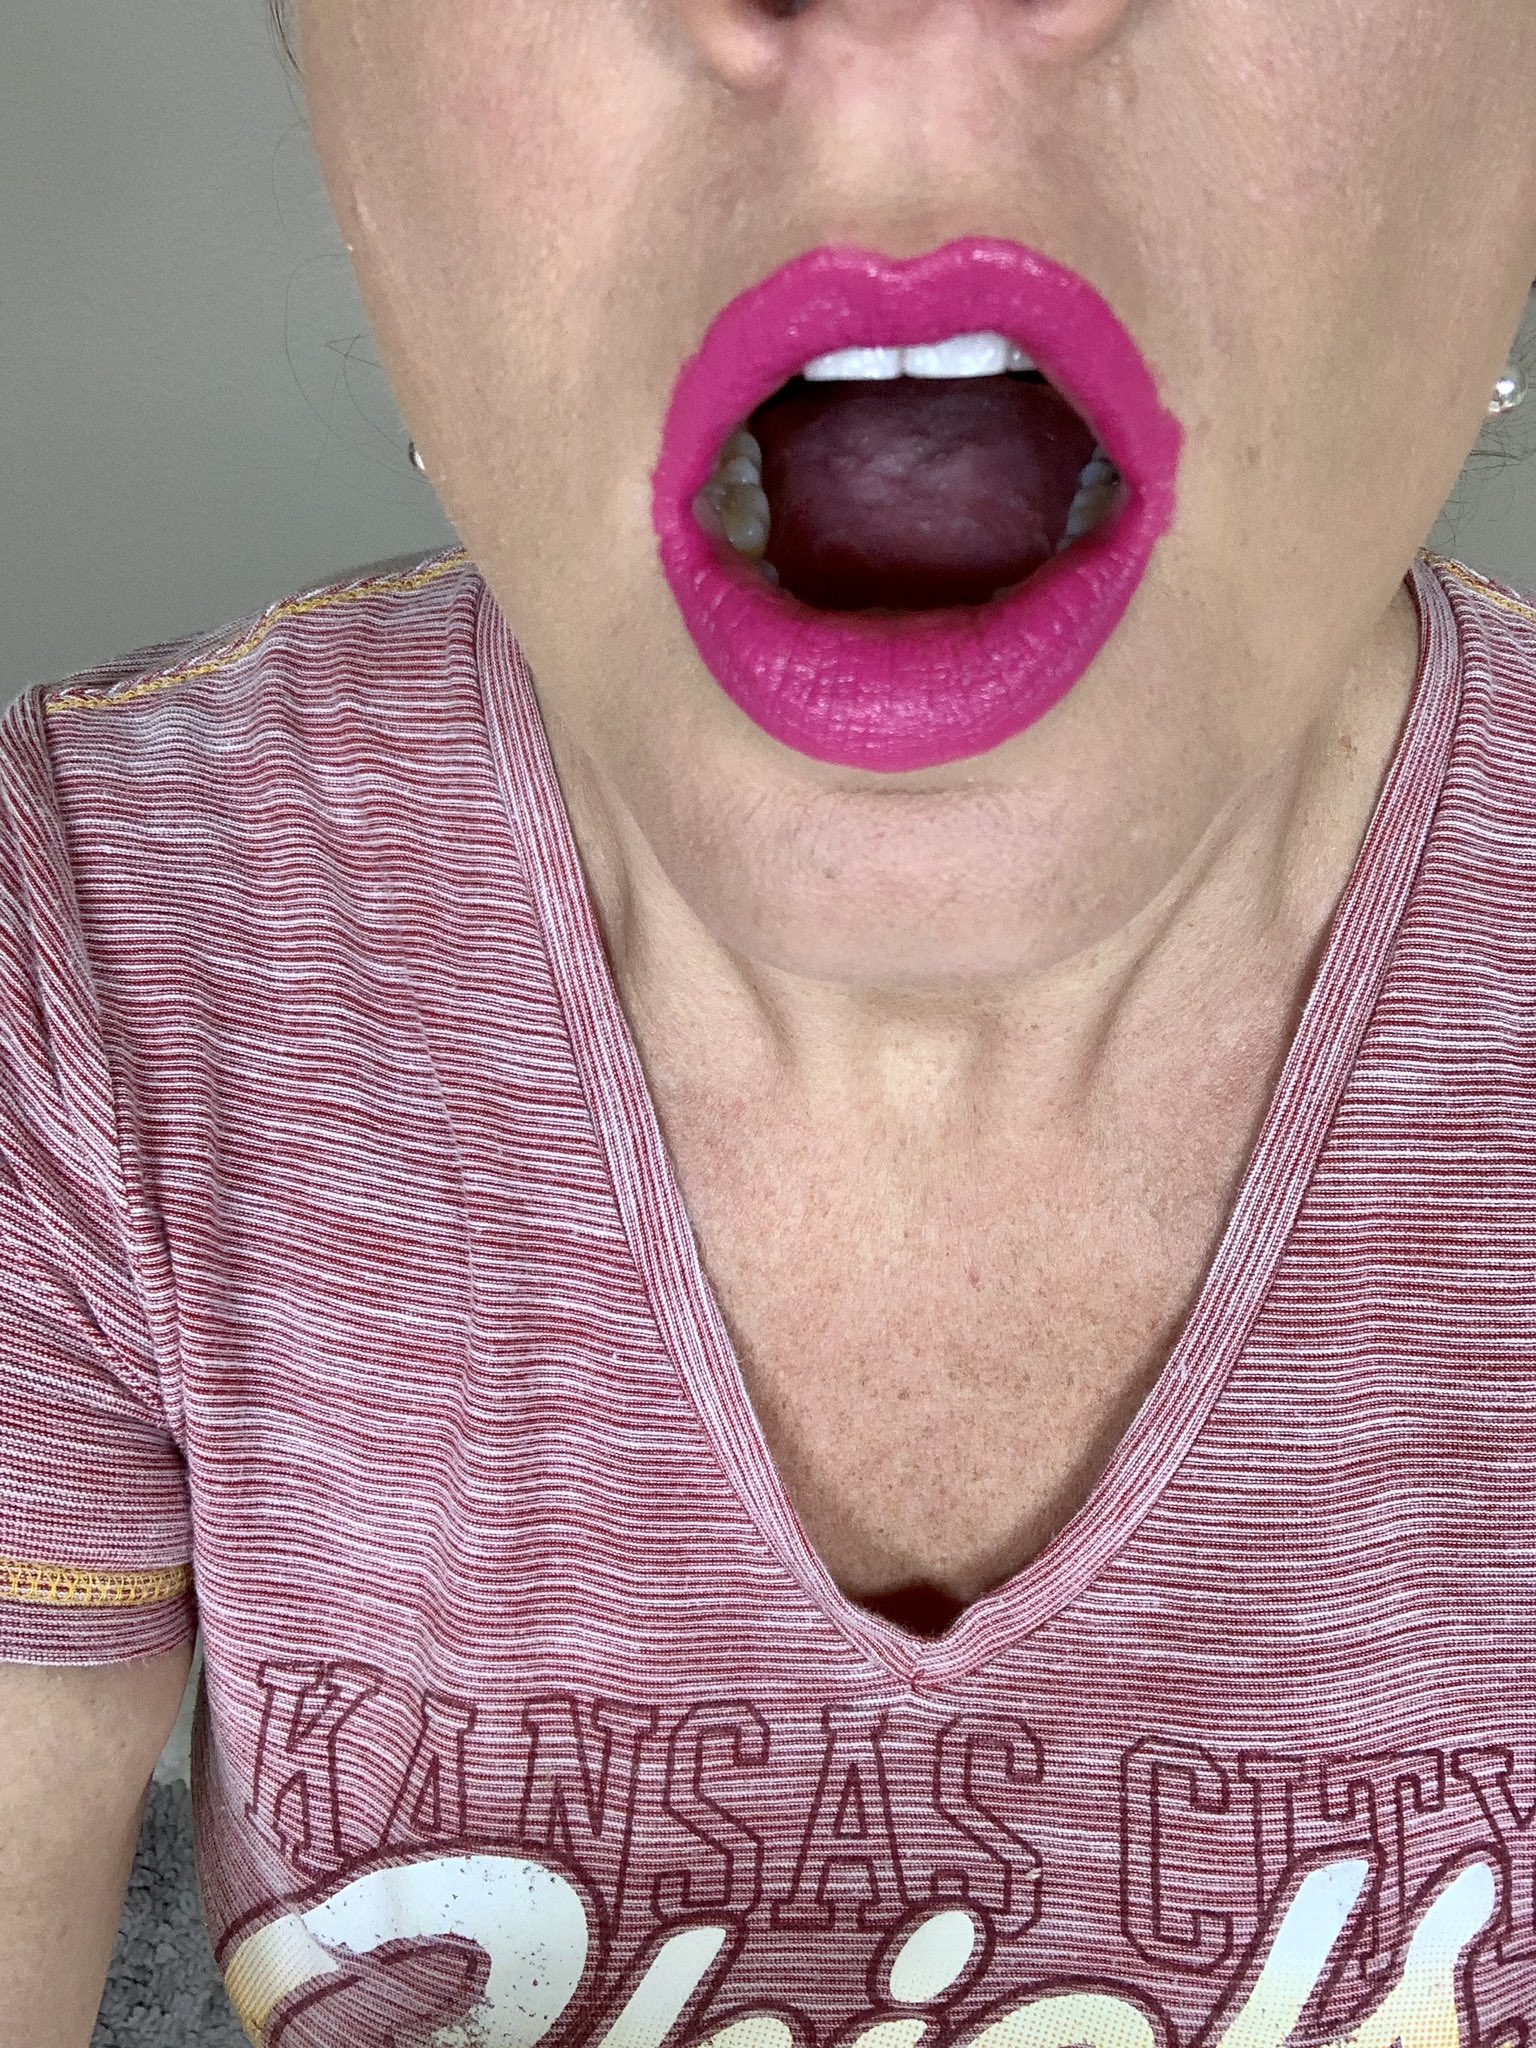 Raquelsunnyjugs On Twitter Todays Lips Called “romantic” Lusciouslips Dsl Kissable